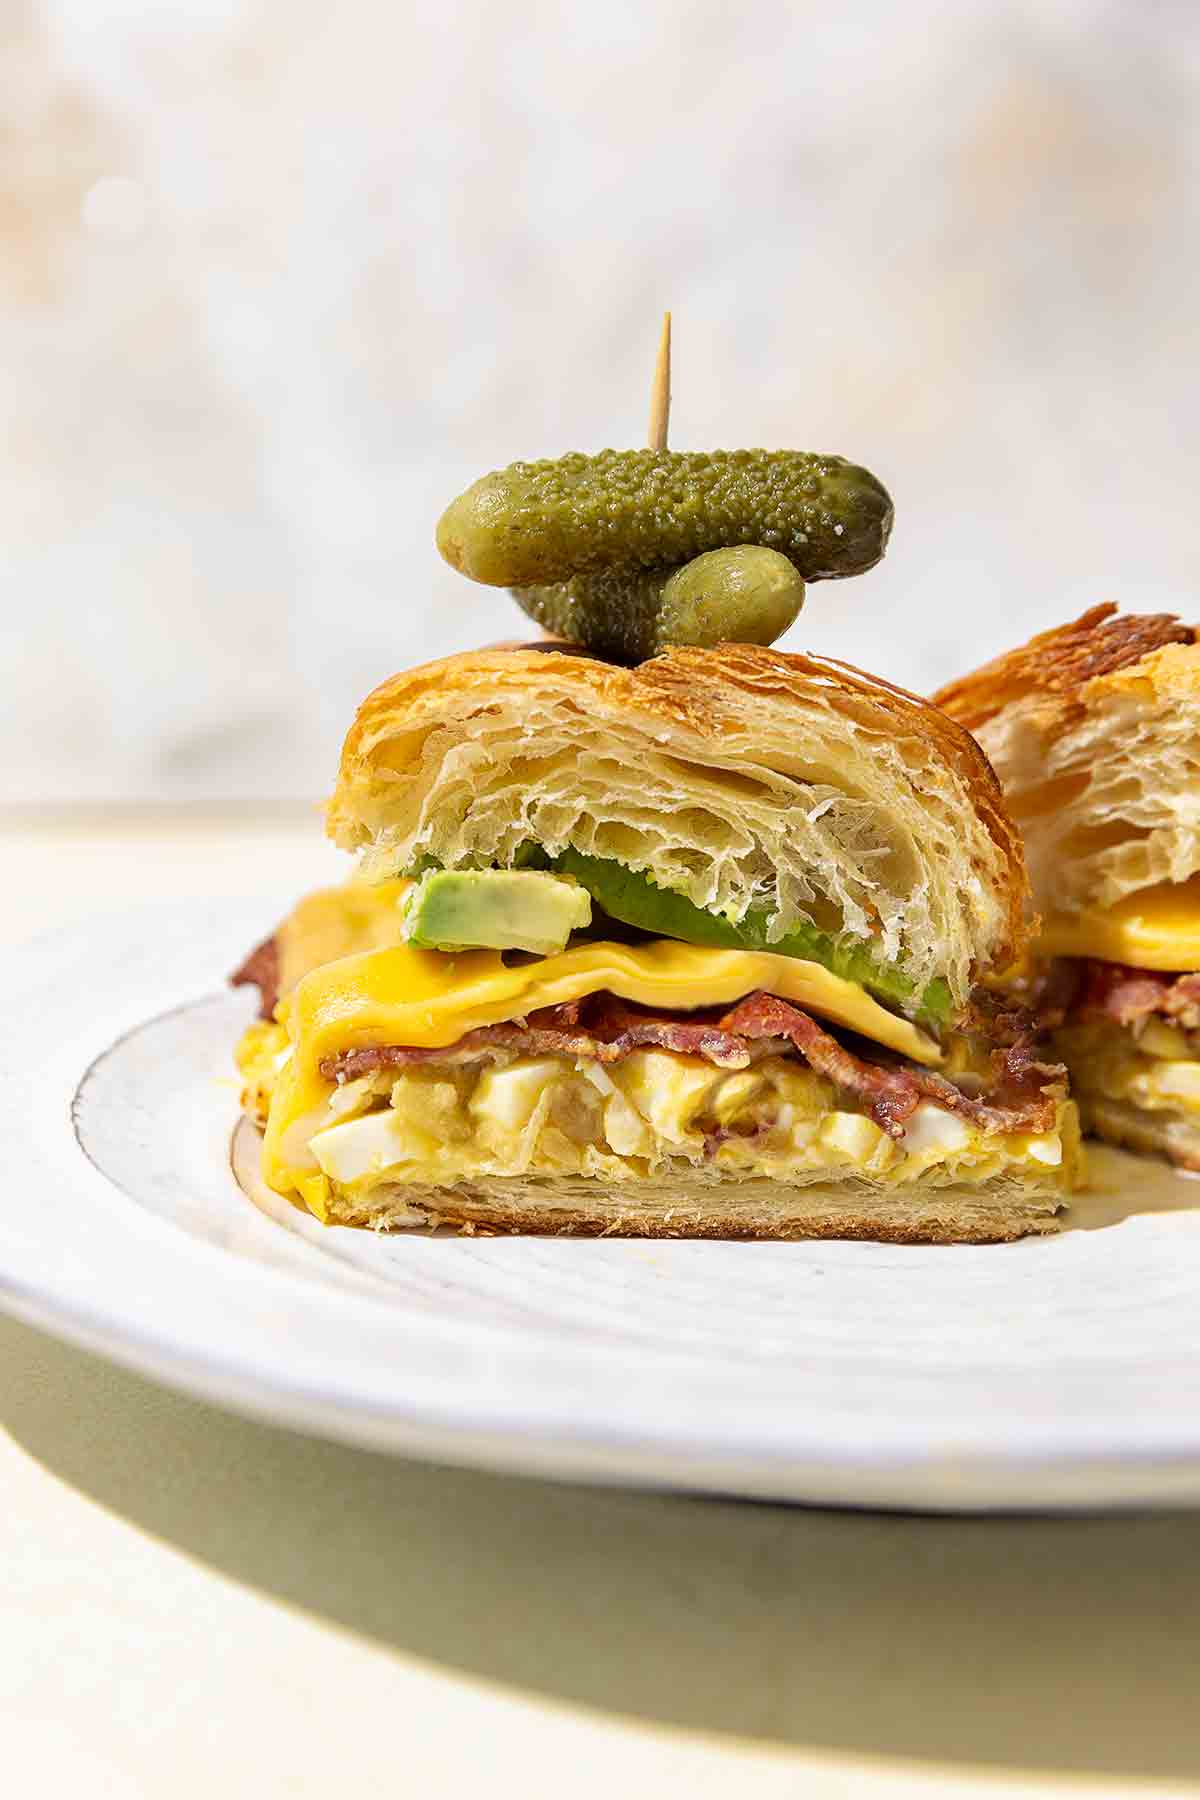 A halved croissant sandwich with egg salad, bacon, cheese, avocado, and small pickles on a white plate.